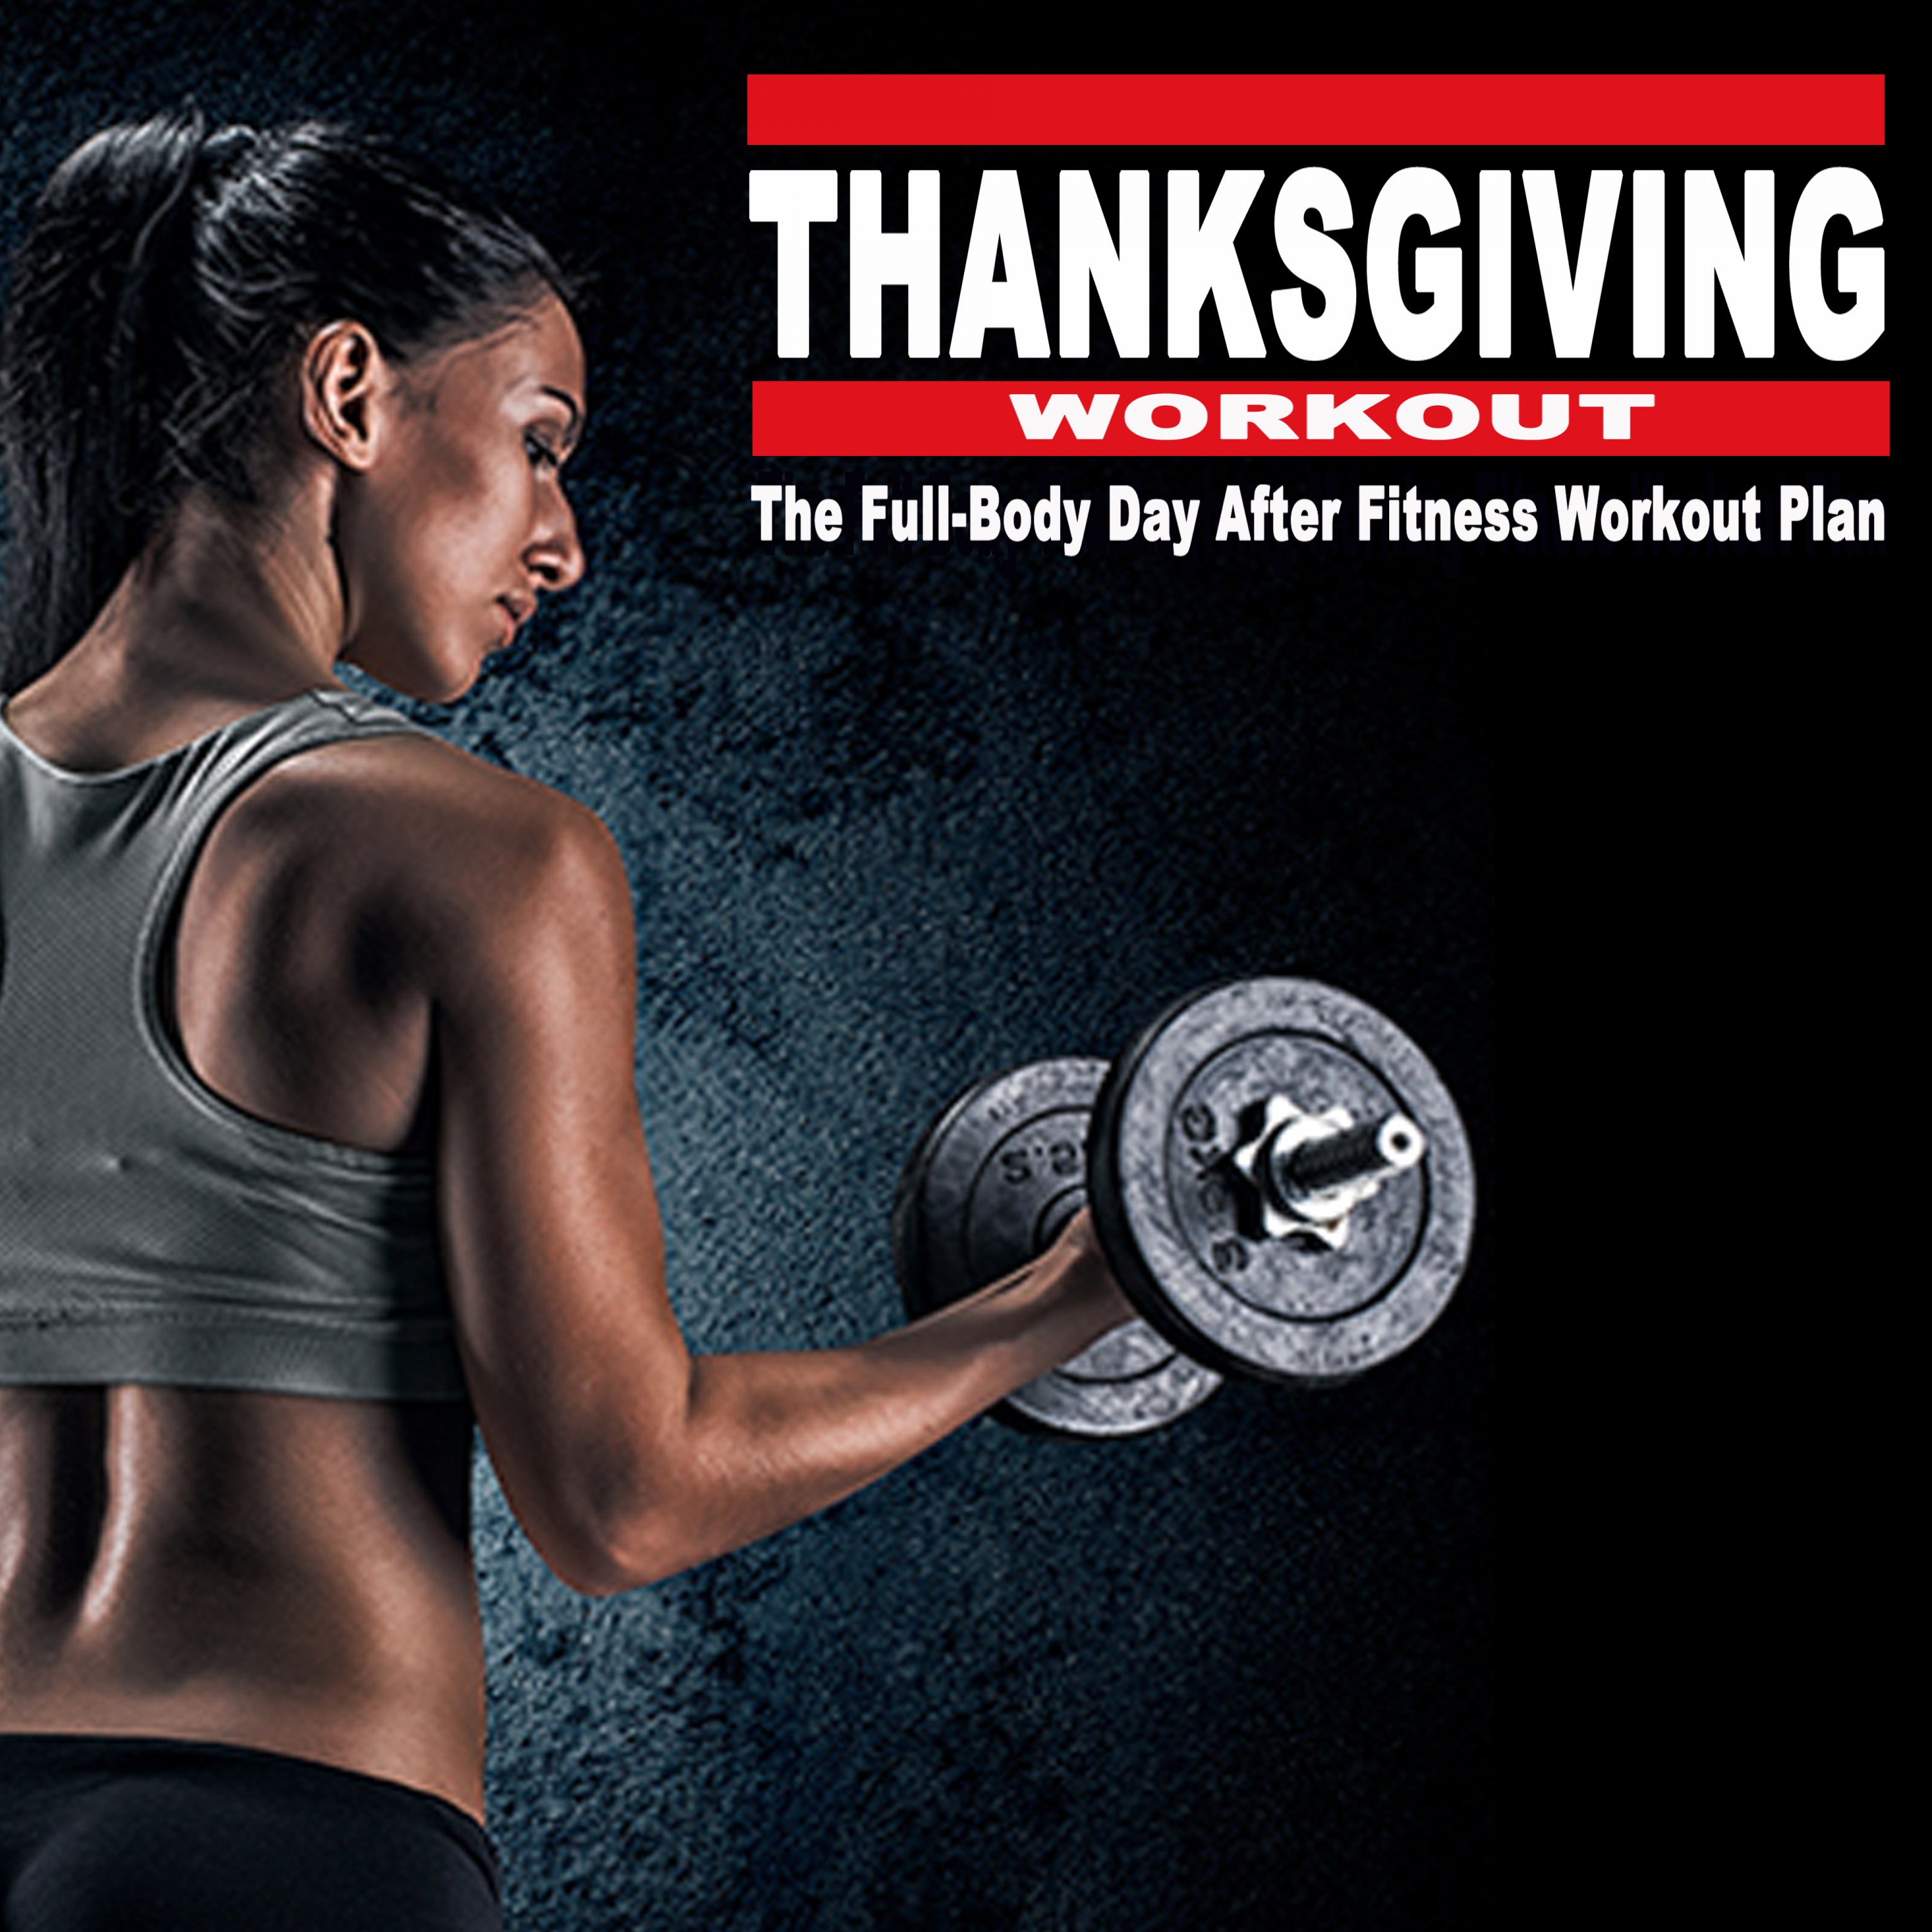 Thanksgiving Workout 2018 - The Full-Body Day After Fitness Workout Plan & DJ Mix